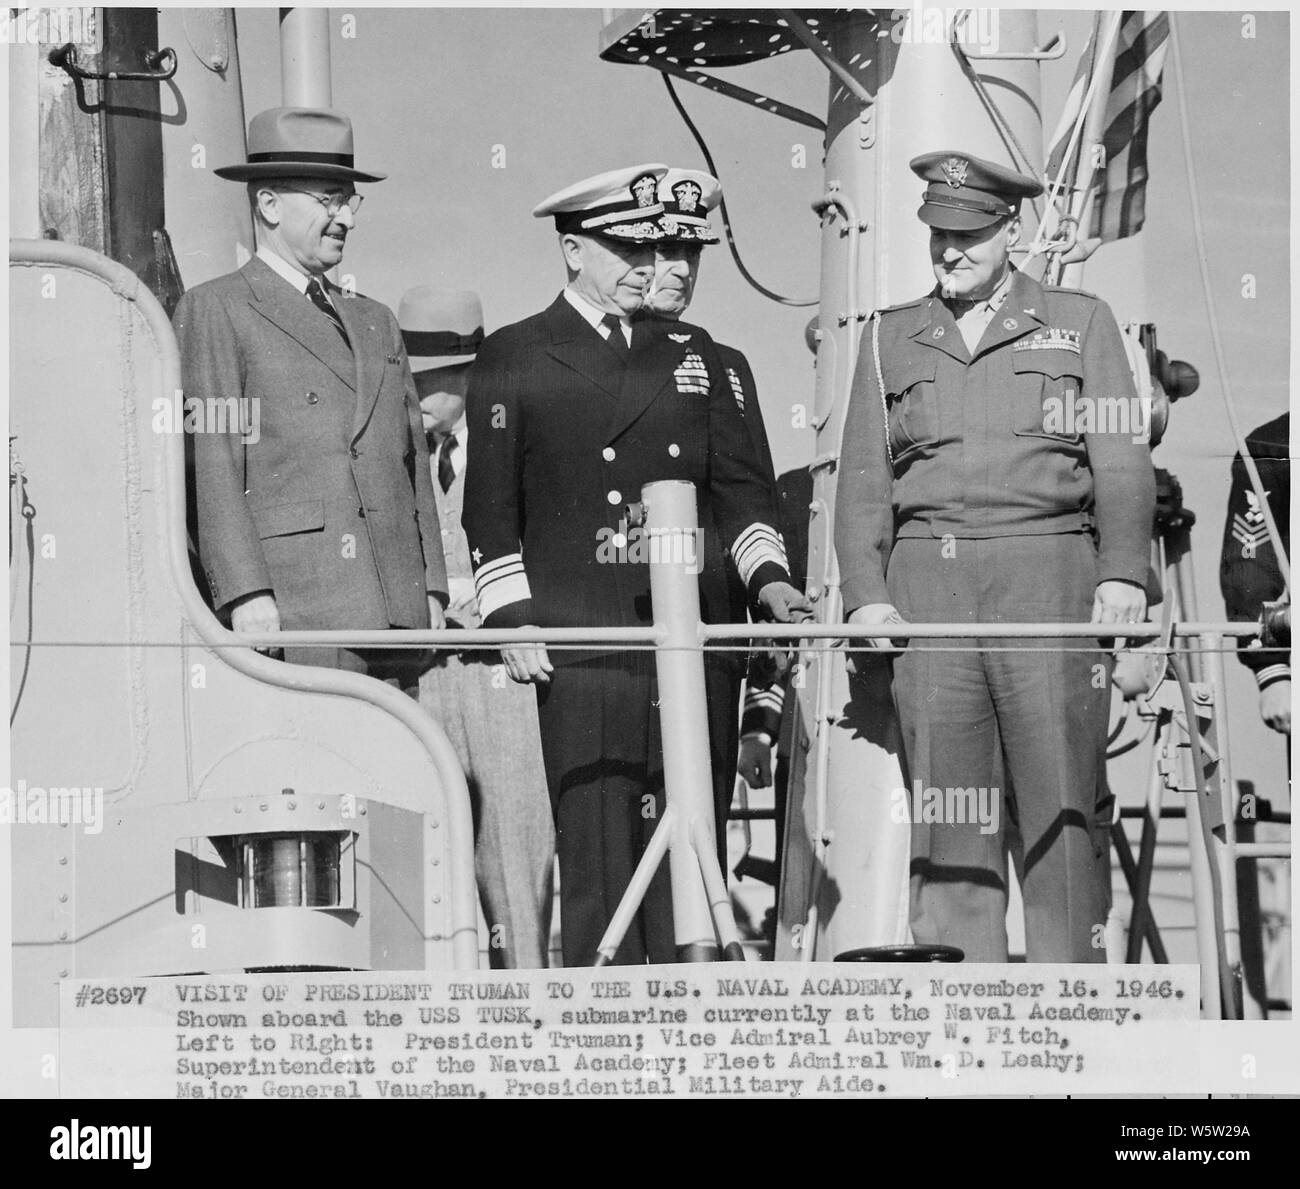 https://c8.alamy.com/comp/W5W29A/photograph-of-president-truman-aboard-a-submarine-the-uss-tusk-during-his-visit-to-the-us-naval-academy-left-to-right-the-president-vice-admiral-aubrey-fitch-superintendent-of-the-naval-academy-fleet-admiral-william-leahy-chief-of-staff-to-the-commander-in-chief-and-general-harry-vaughan-military-aide-to-the-president-W5W29A.jpg